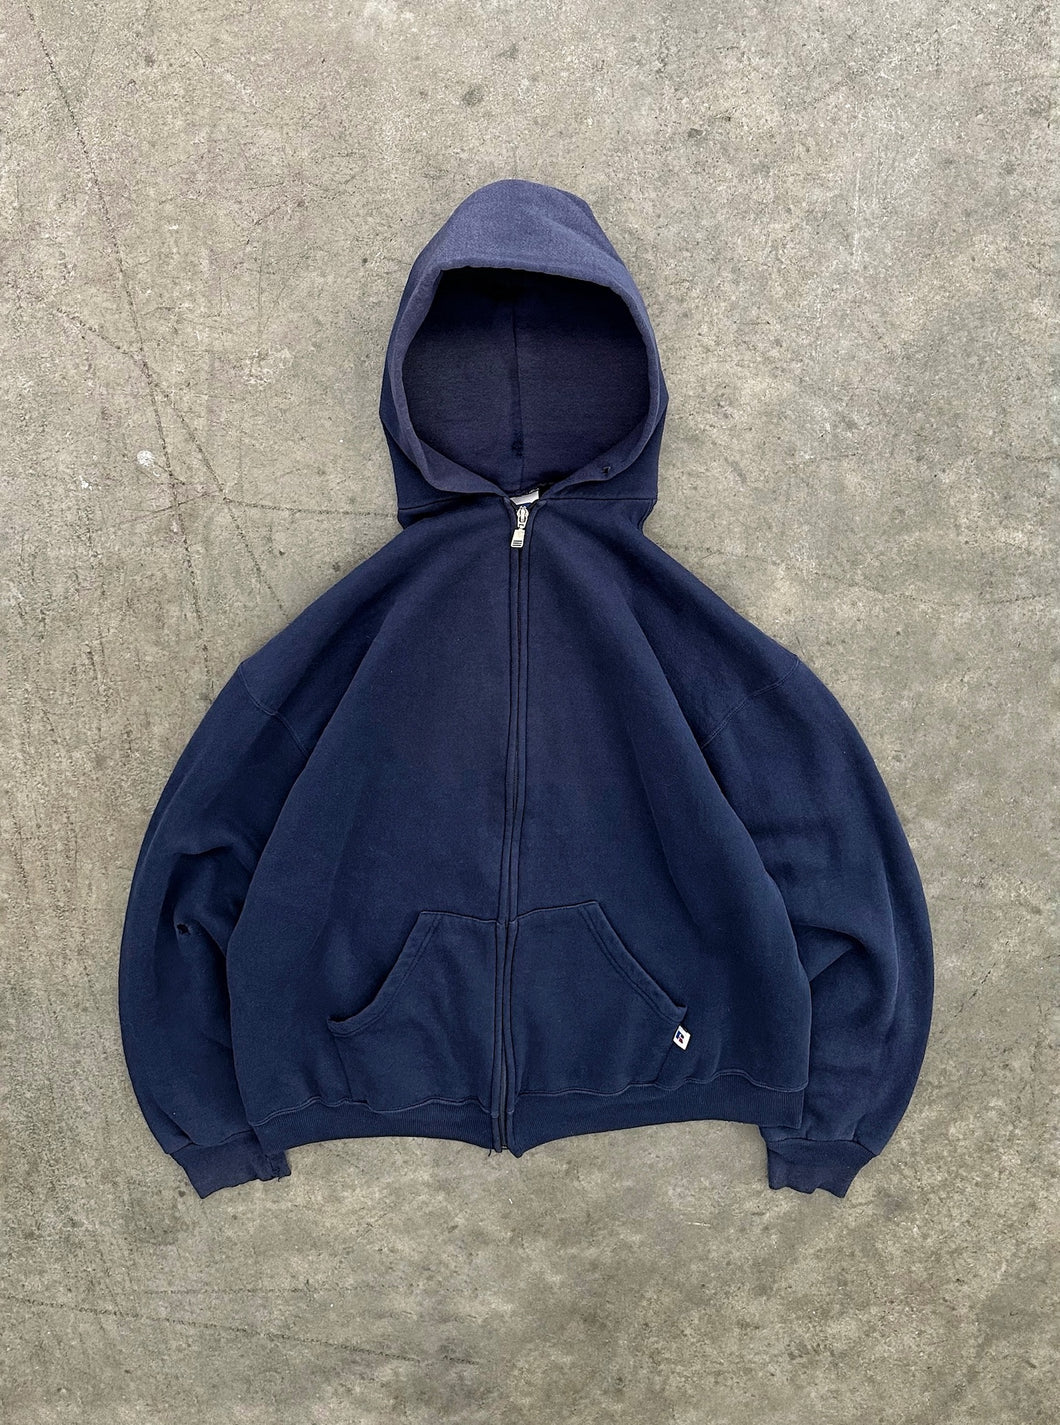 SUN FADED NAVY BLUE RUSSELL ZIP UP HOODIE - 1990S